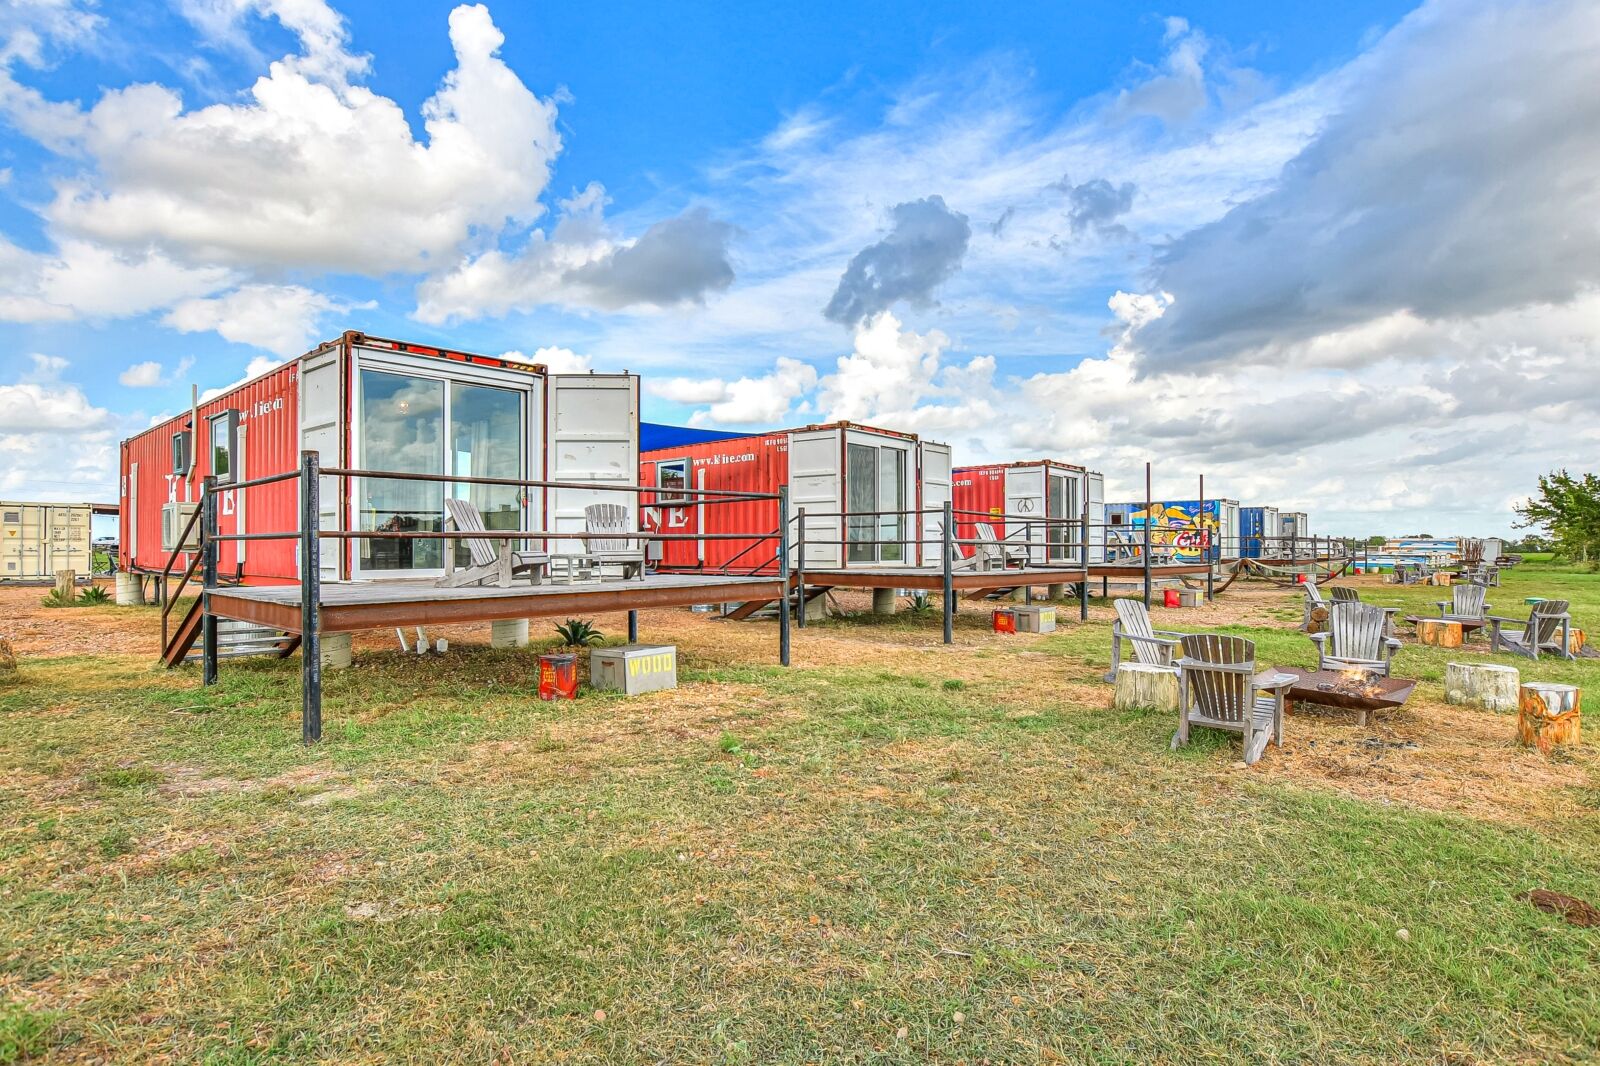 Cabins at Flophouze Shipping Container Hotel glamping Texas Hill Country 